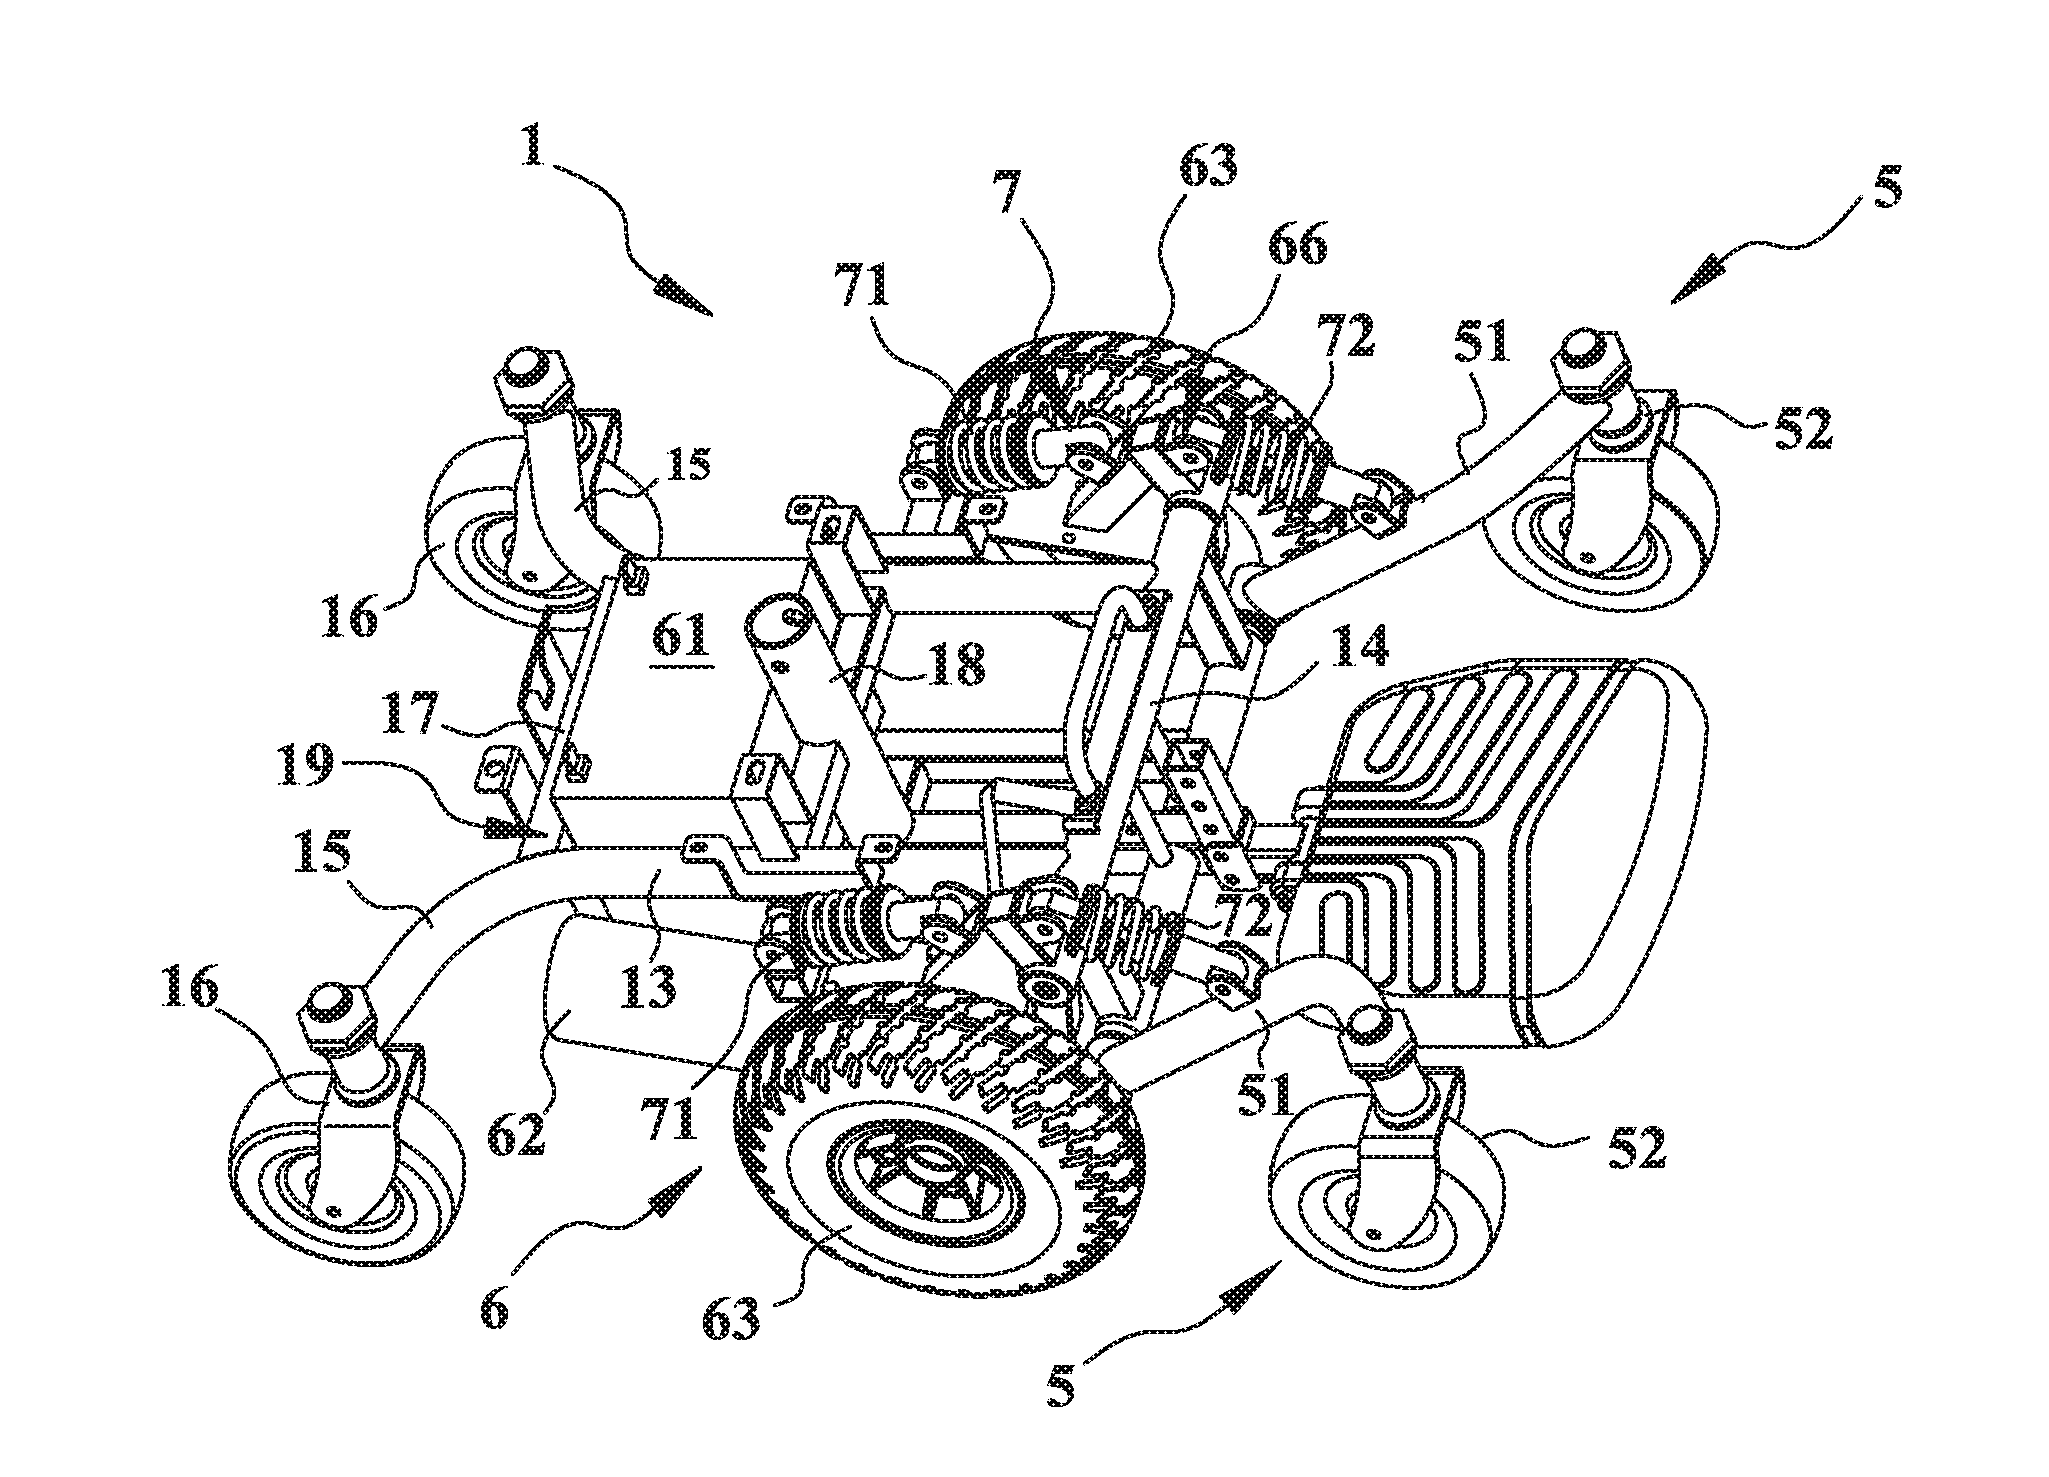 Electric-powered scooter with independent ground engaging mechanisms